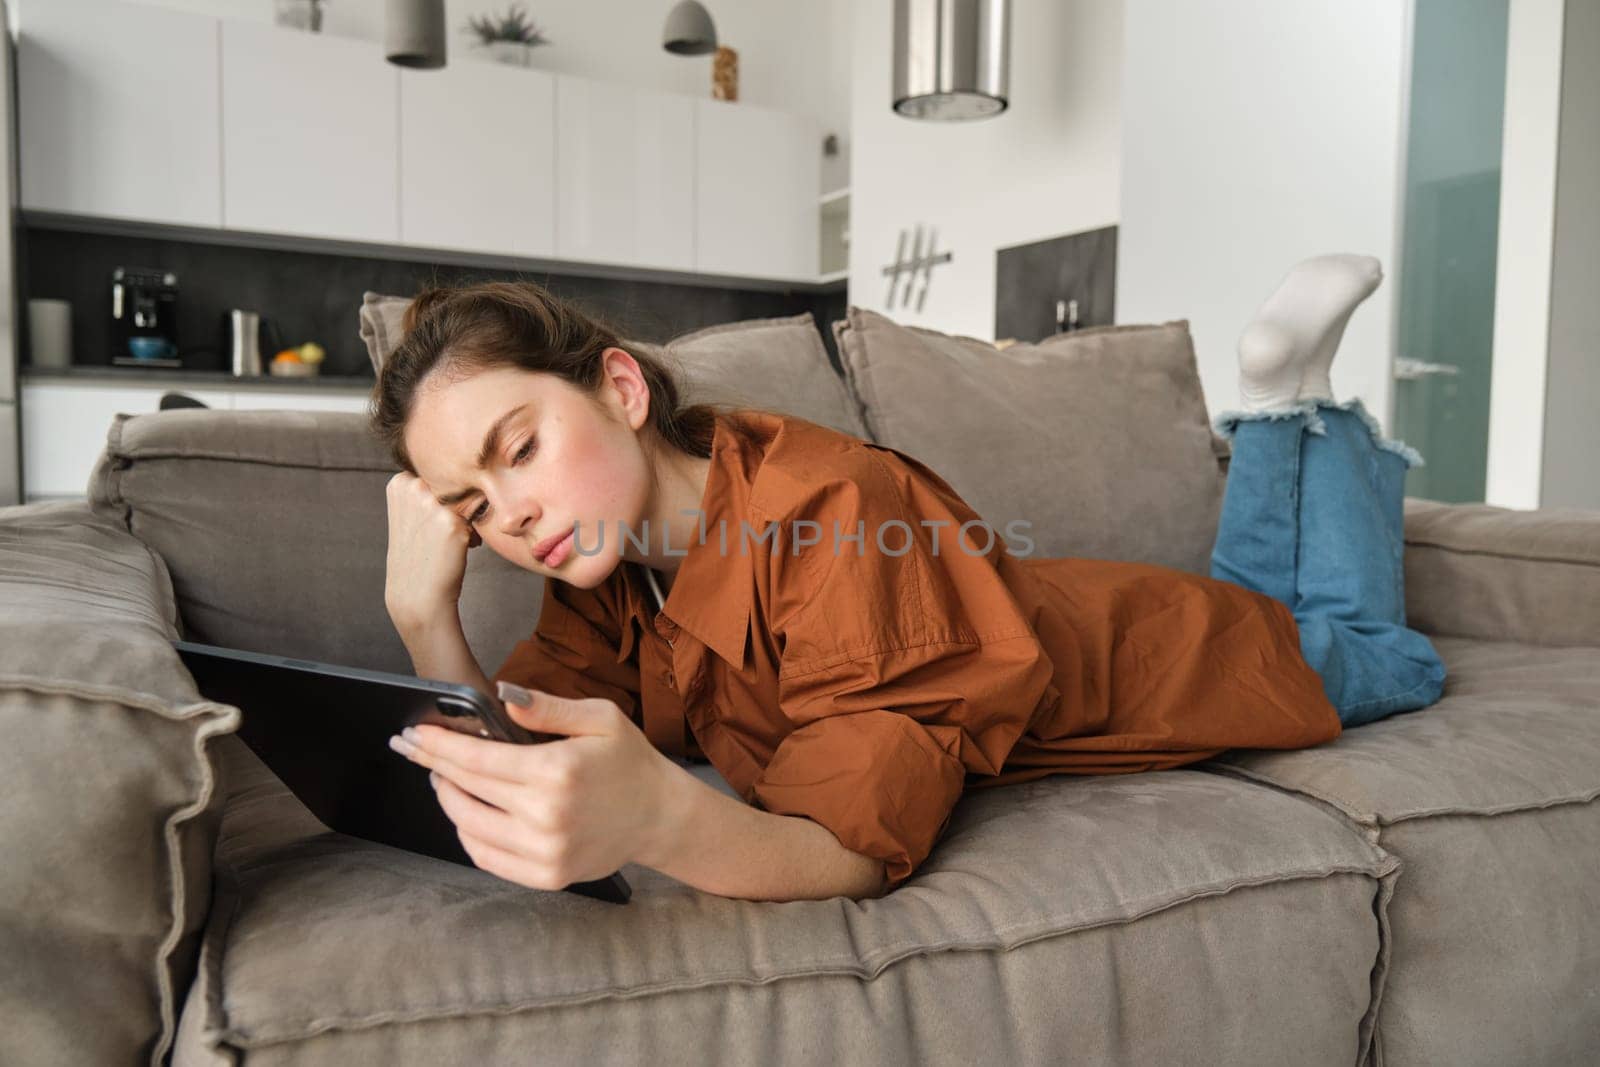 Portrait of woman with sad face, lying on couch at home, resting in living room with digital tablet, frowning and looking frustrated.